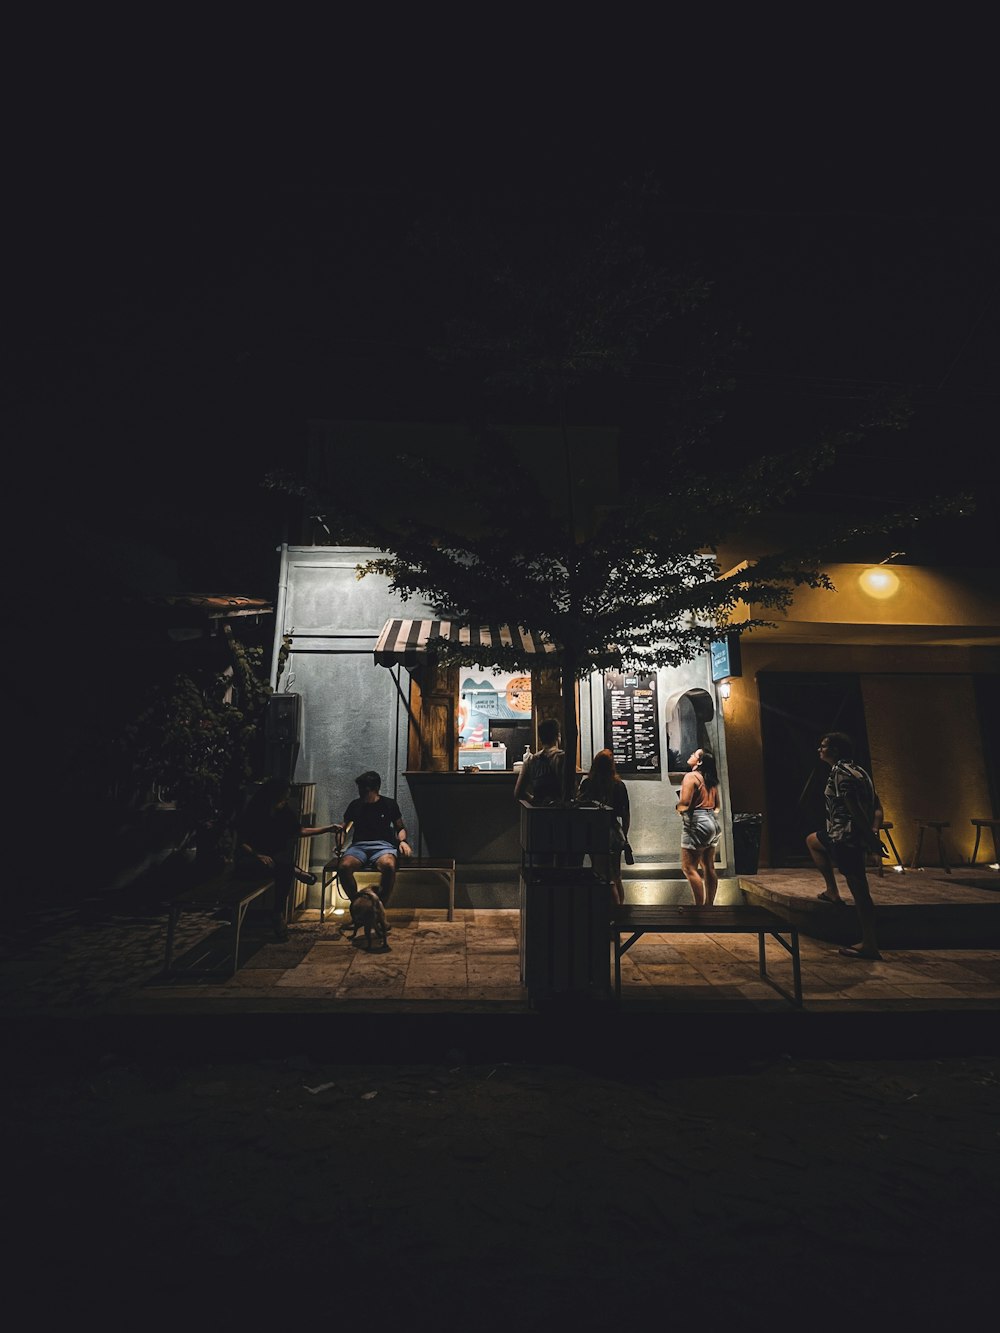 a group of people sitting outside of a building at night